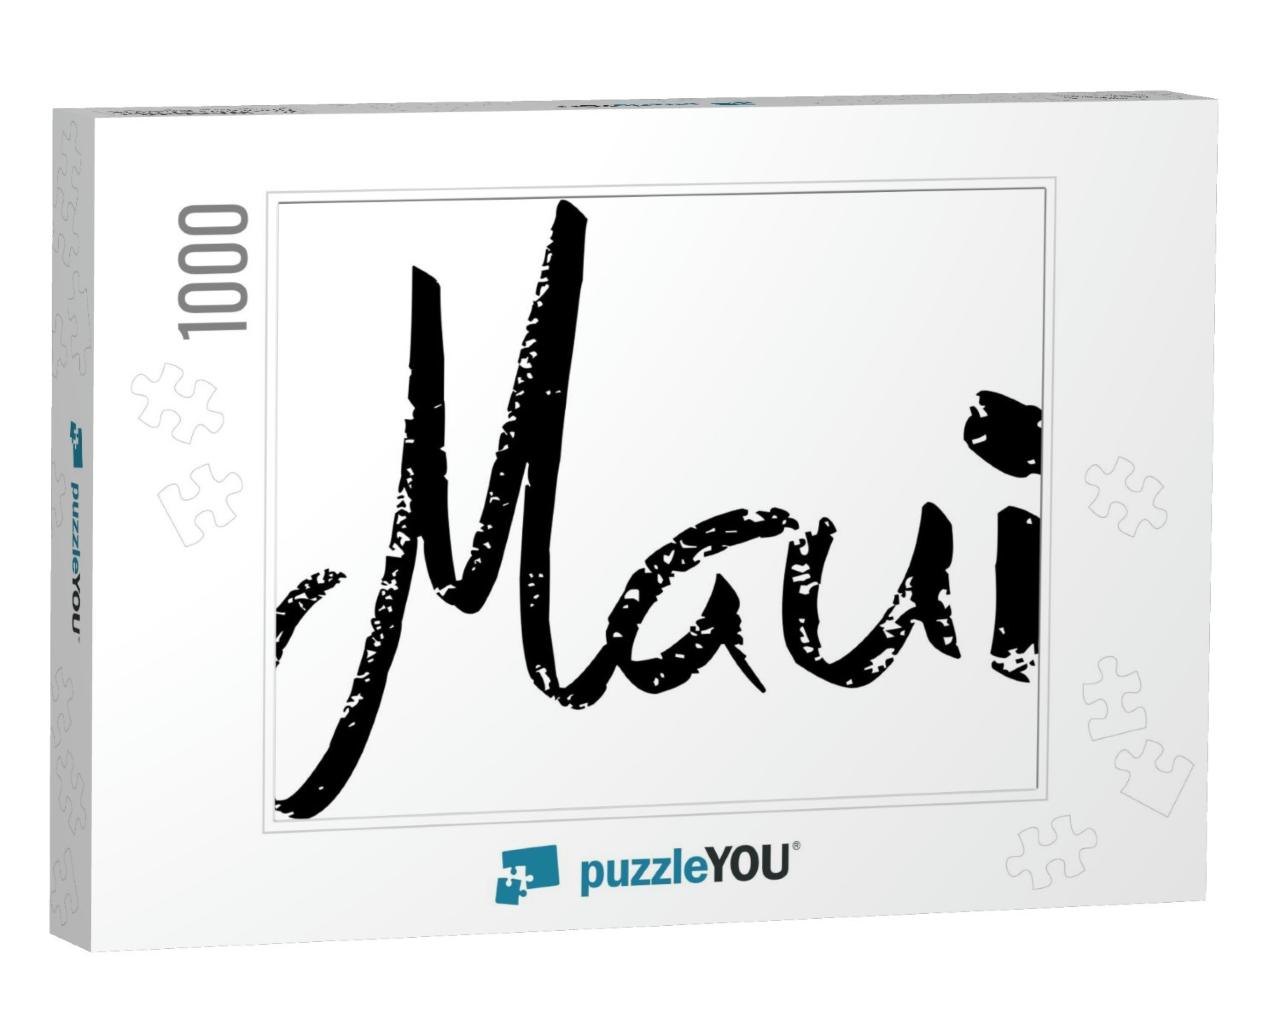 Maui Text Sign Illustration on White Background... Jigsaw Puzzle with 1000 pieces